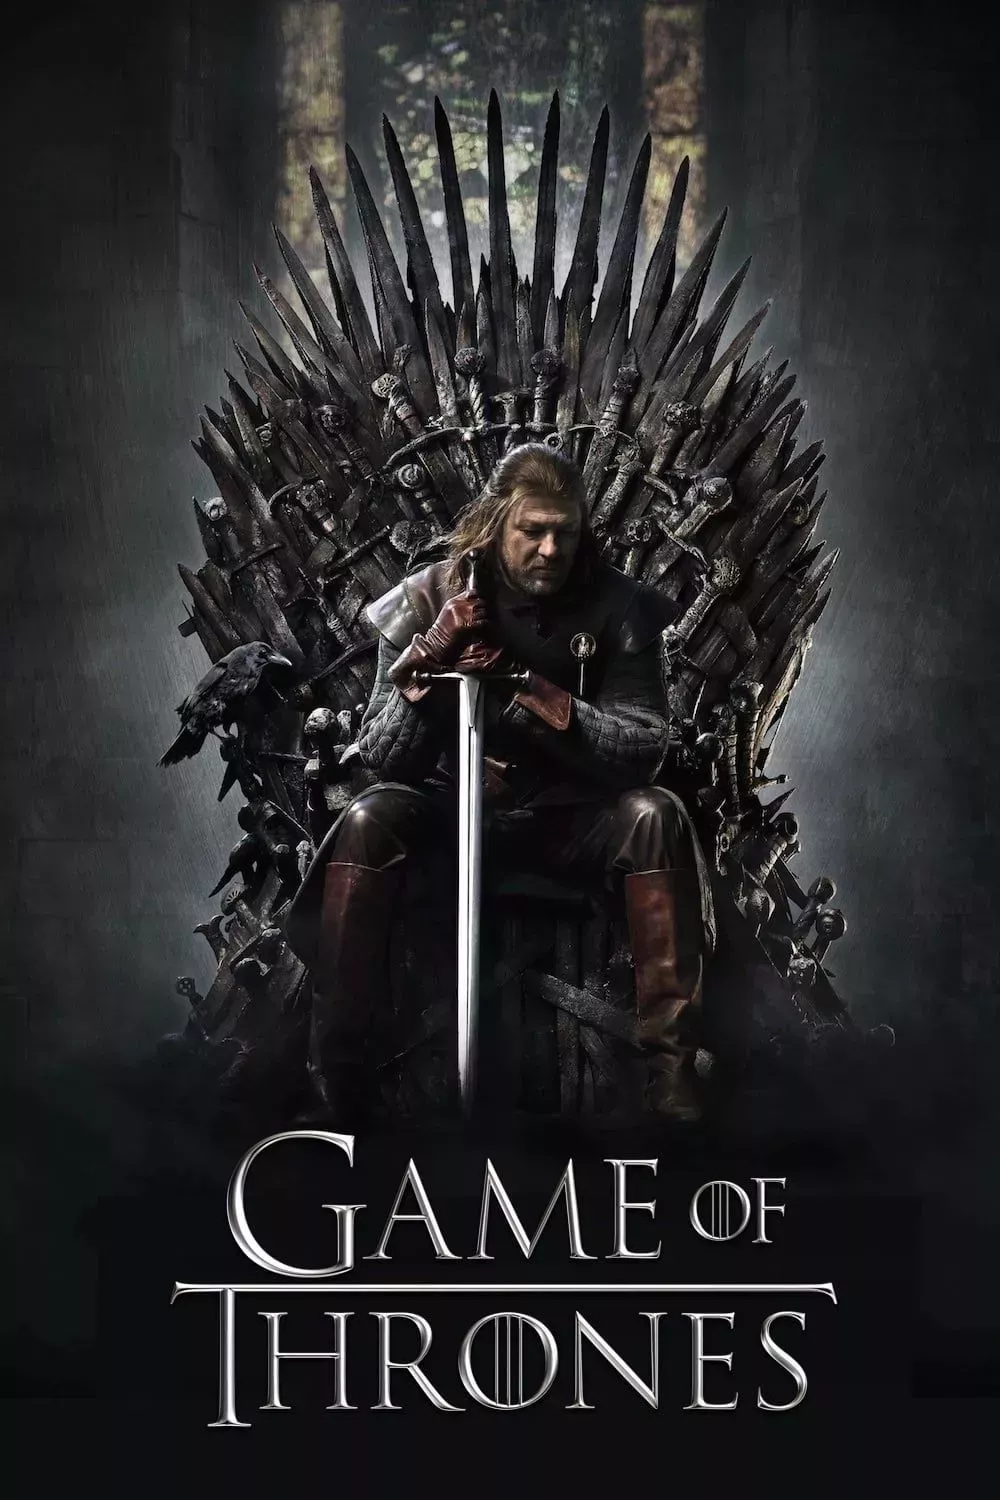 Sean Bean sits on the Iron Throne in Game of Thrones Season 1 poster